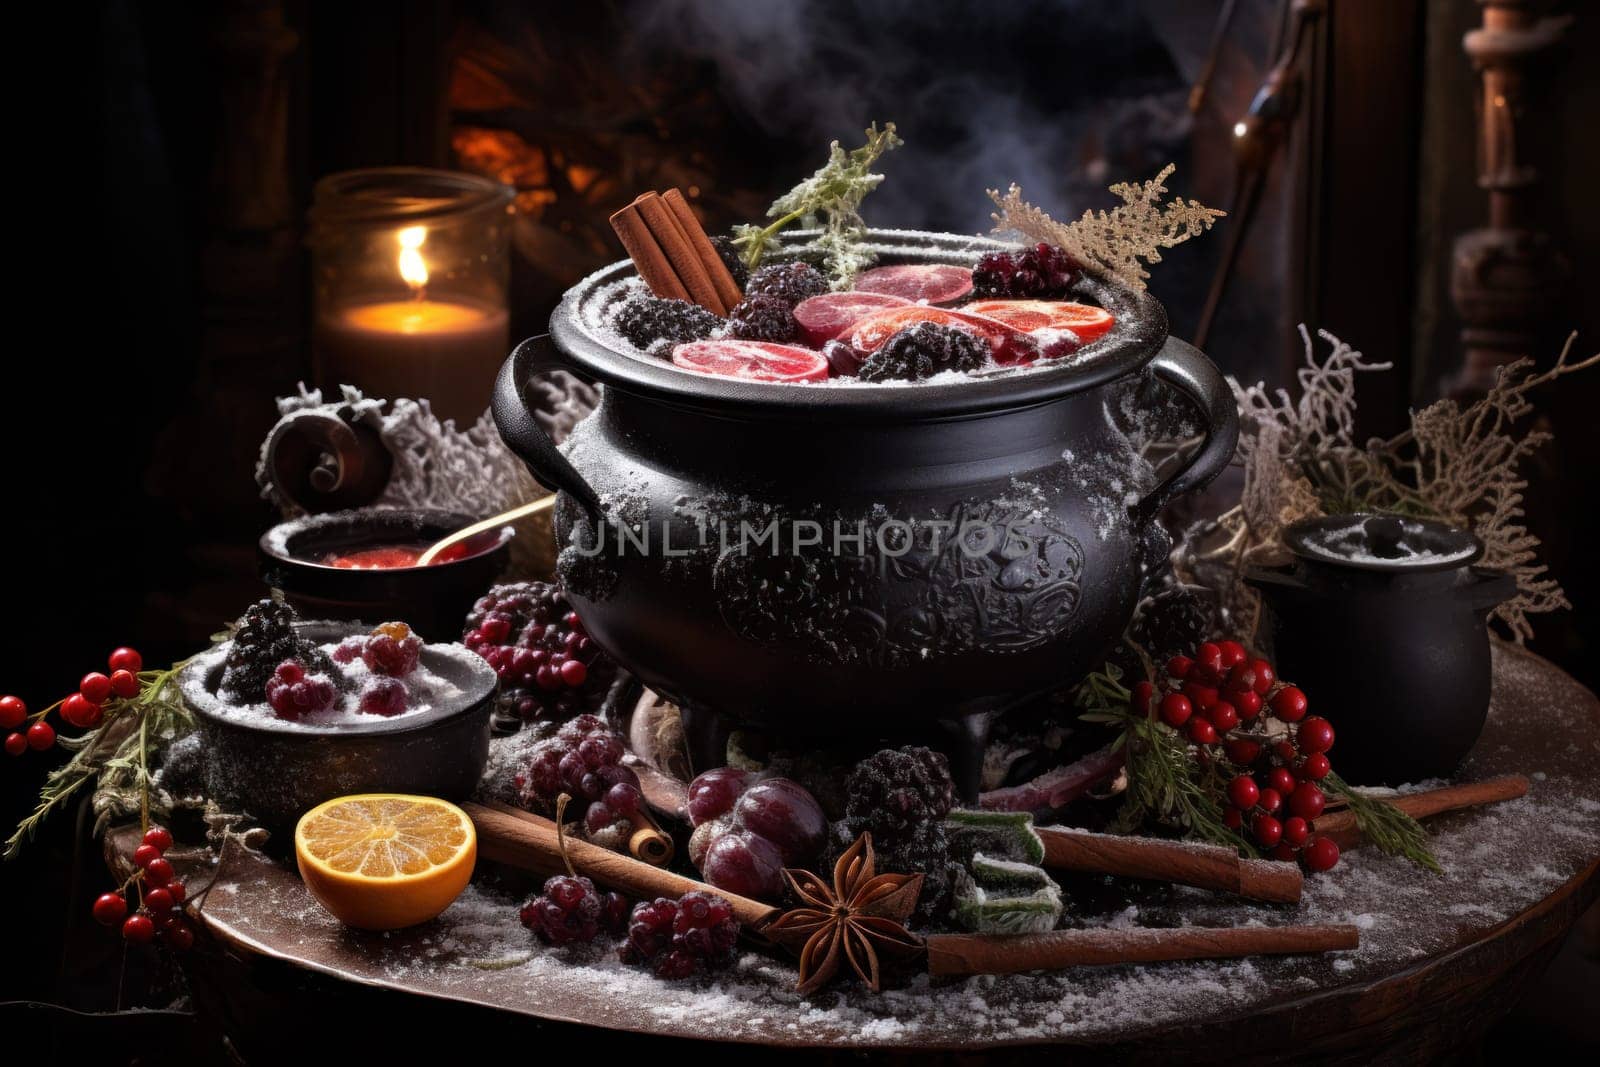 A mouthwatering portrayal of winter's culinary delights, showcasing the artful photography of winter-inspired dishes and beverages like hot soup, roasted chestnuts, and mulled wine.